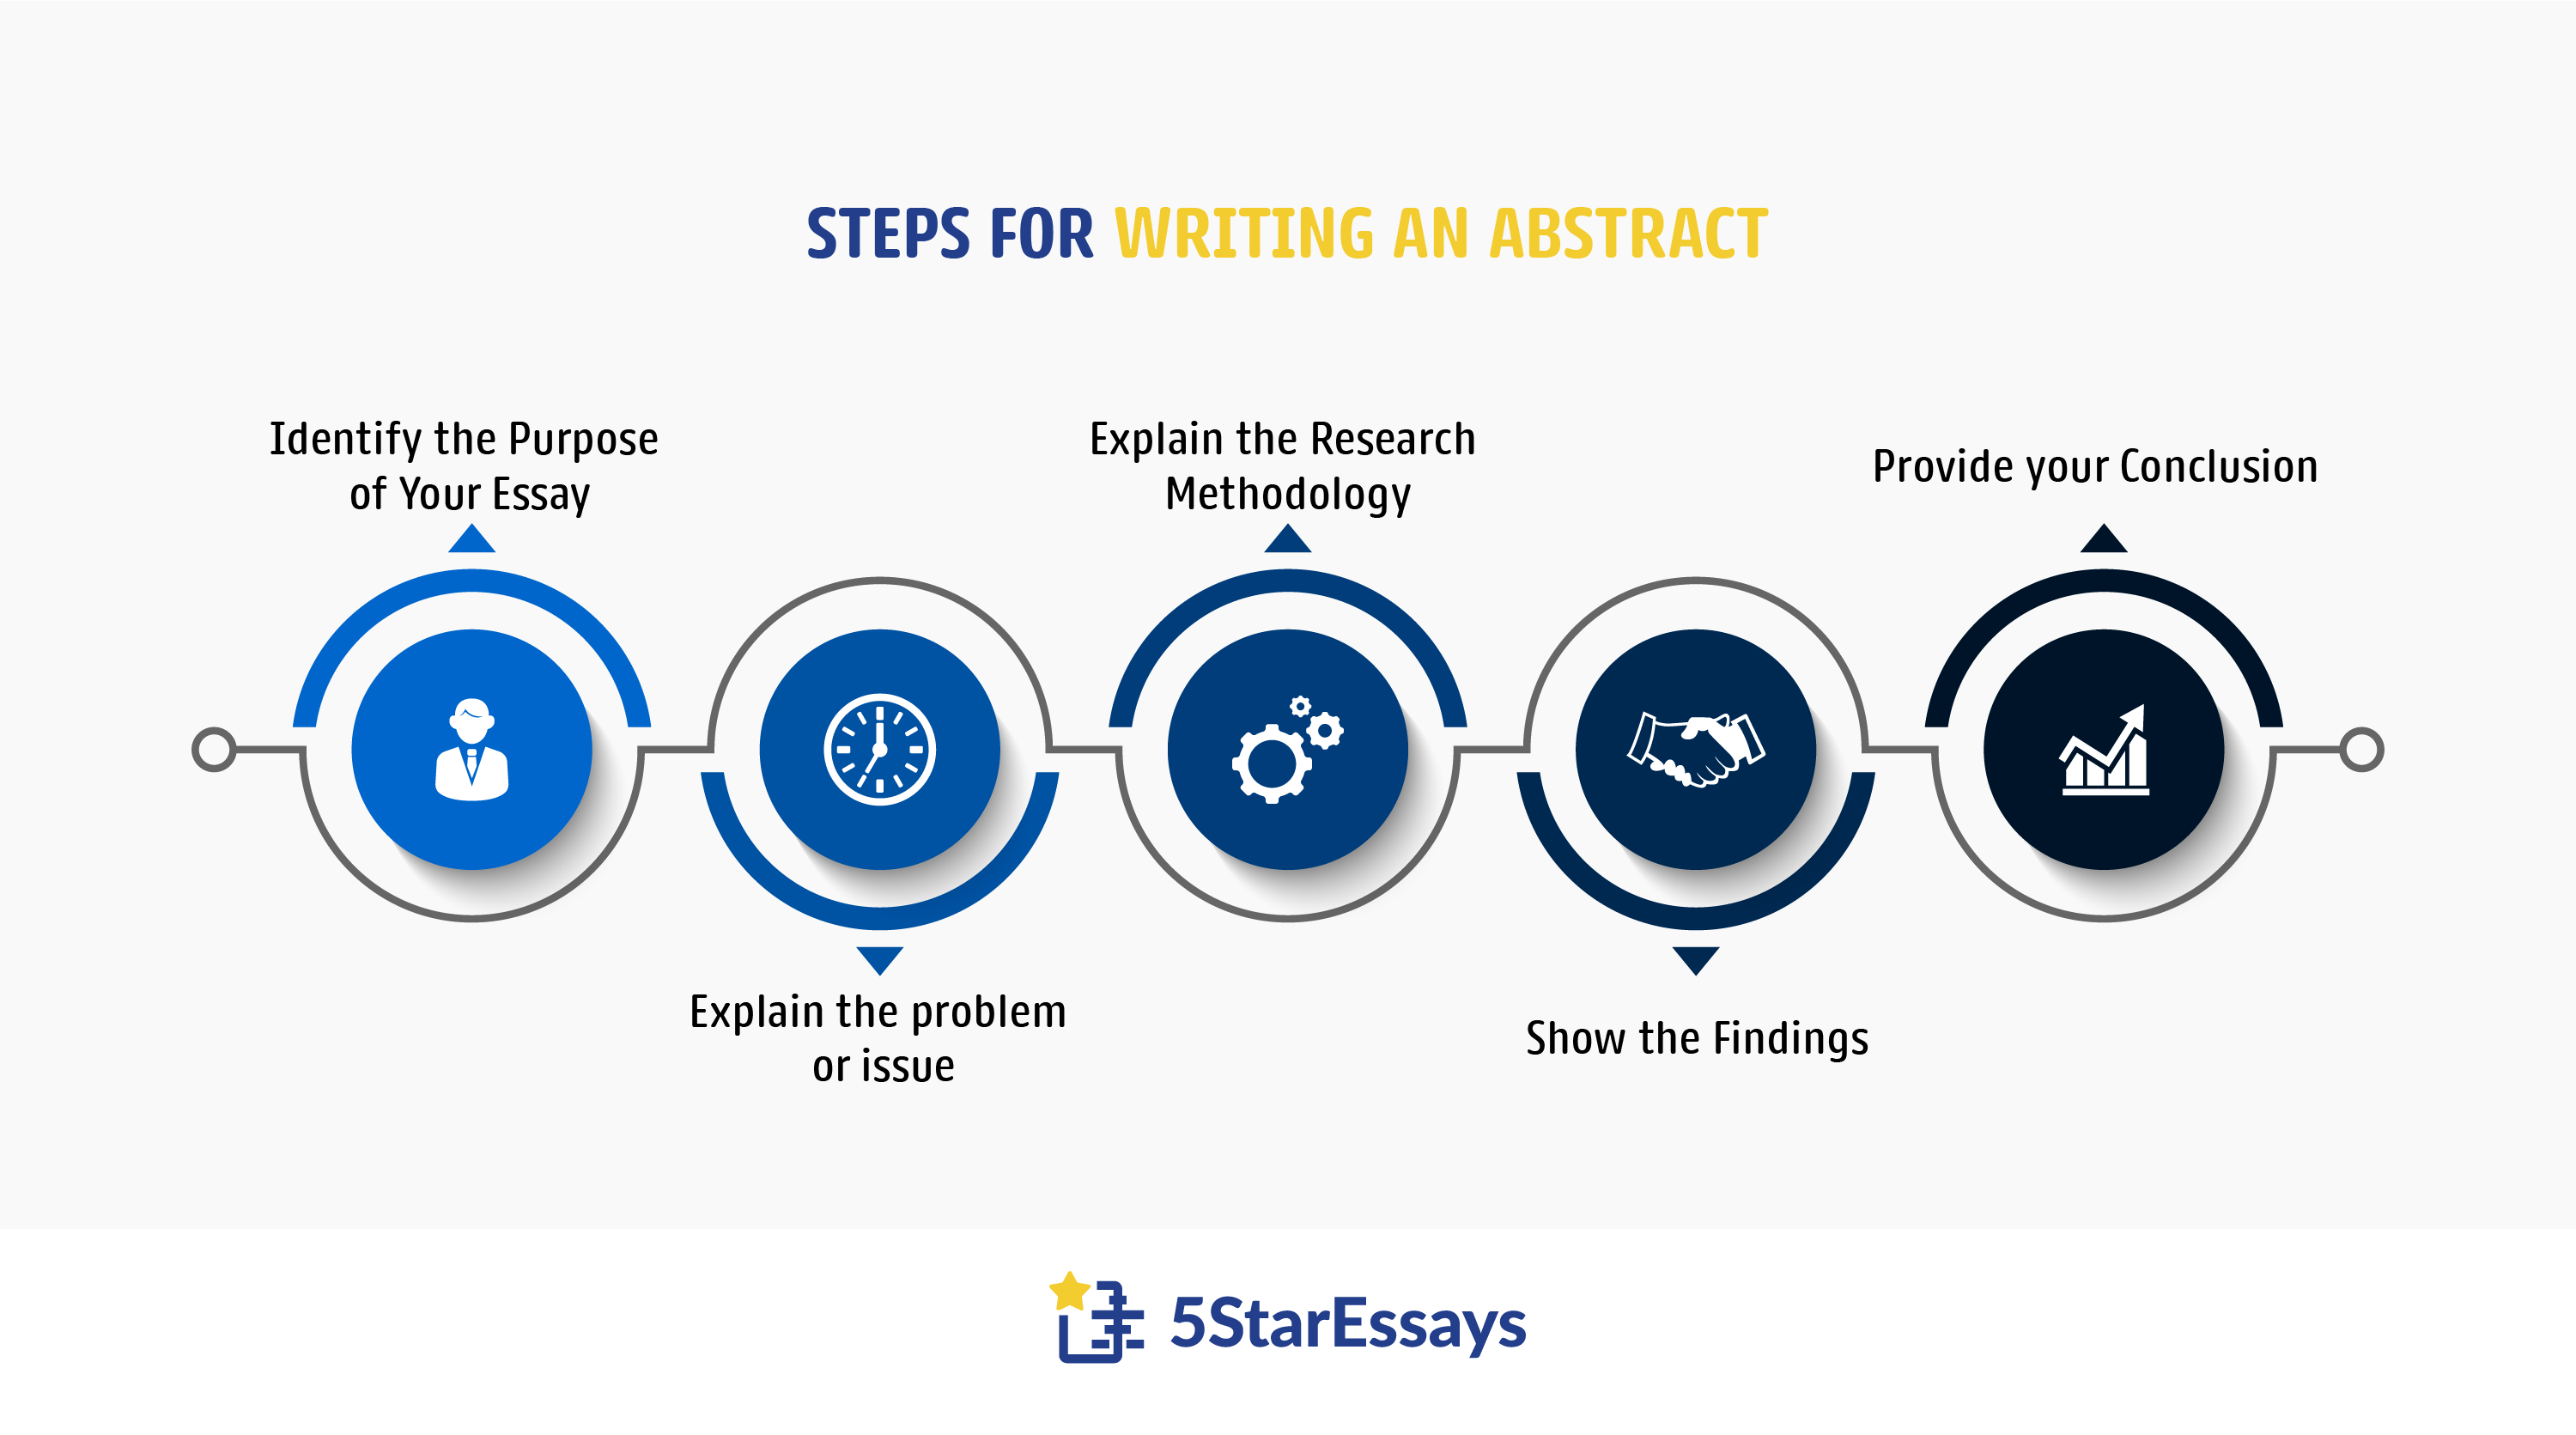 Steps for Writing an Abstract